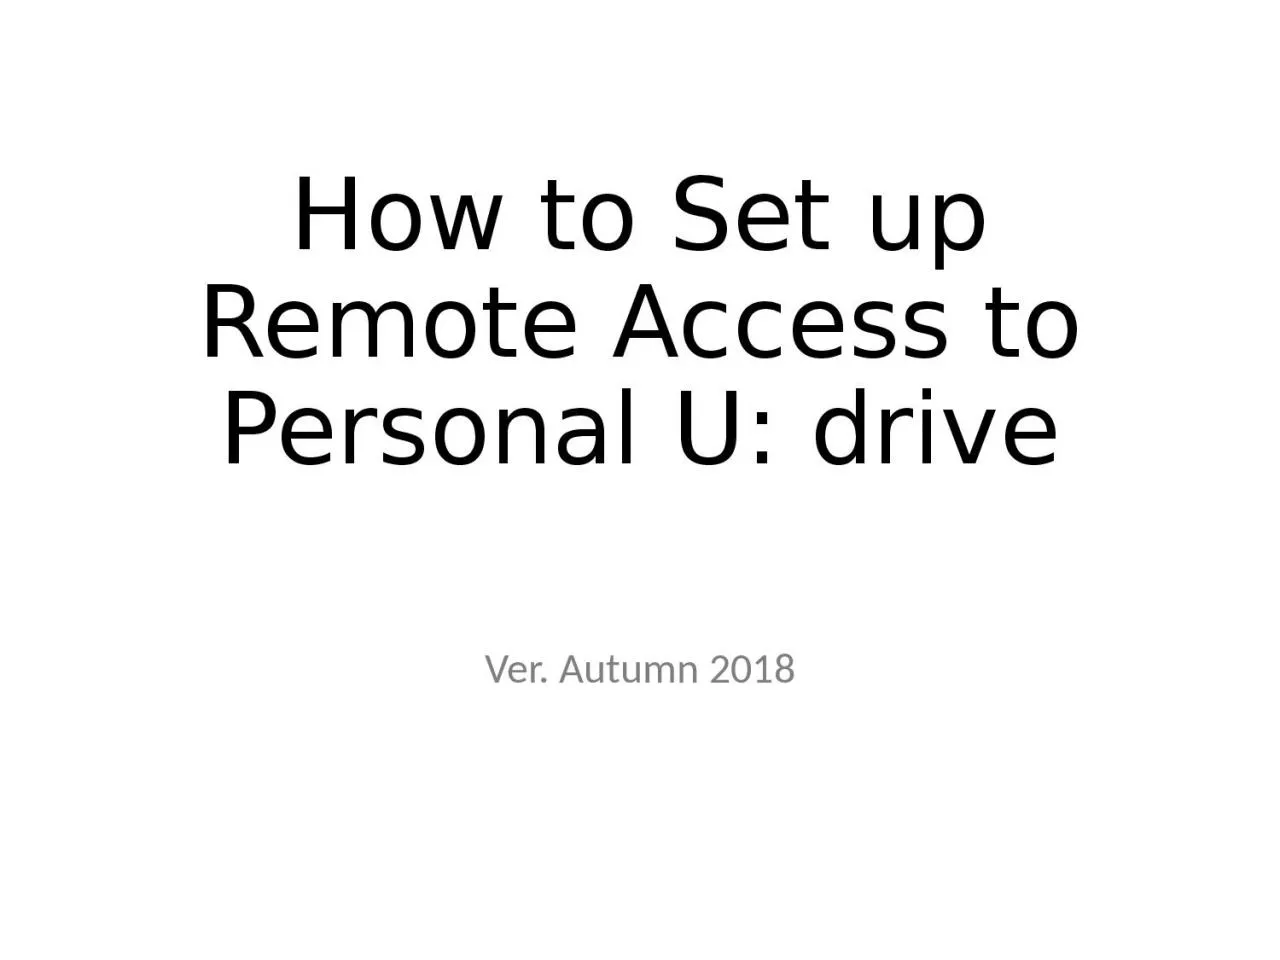 How to Set up Remote Access to Personal U: drive